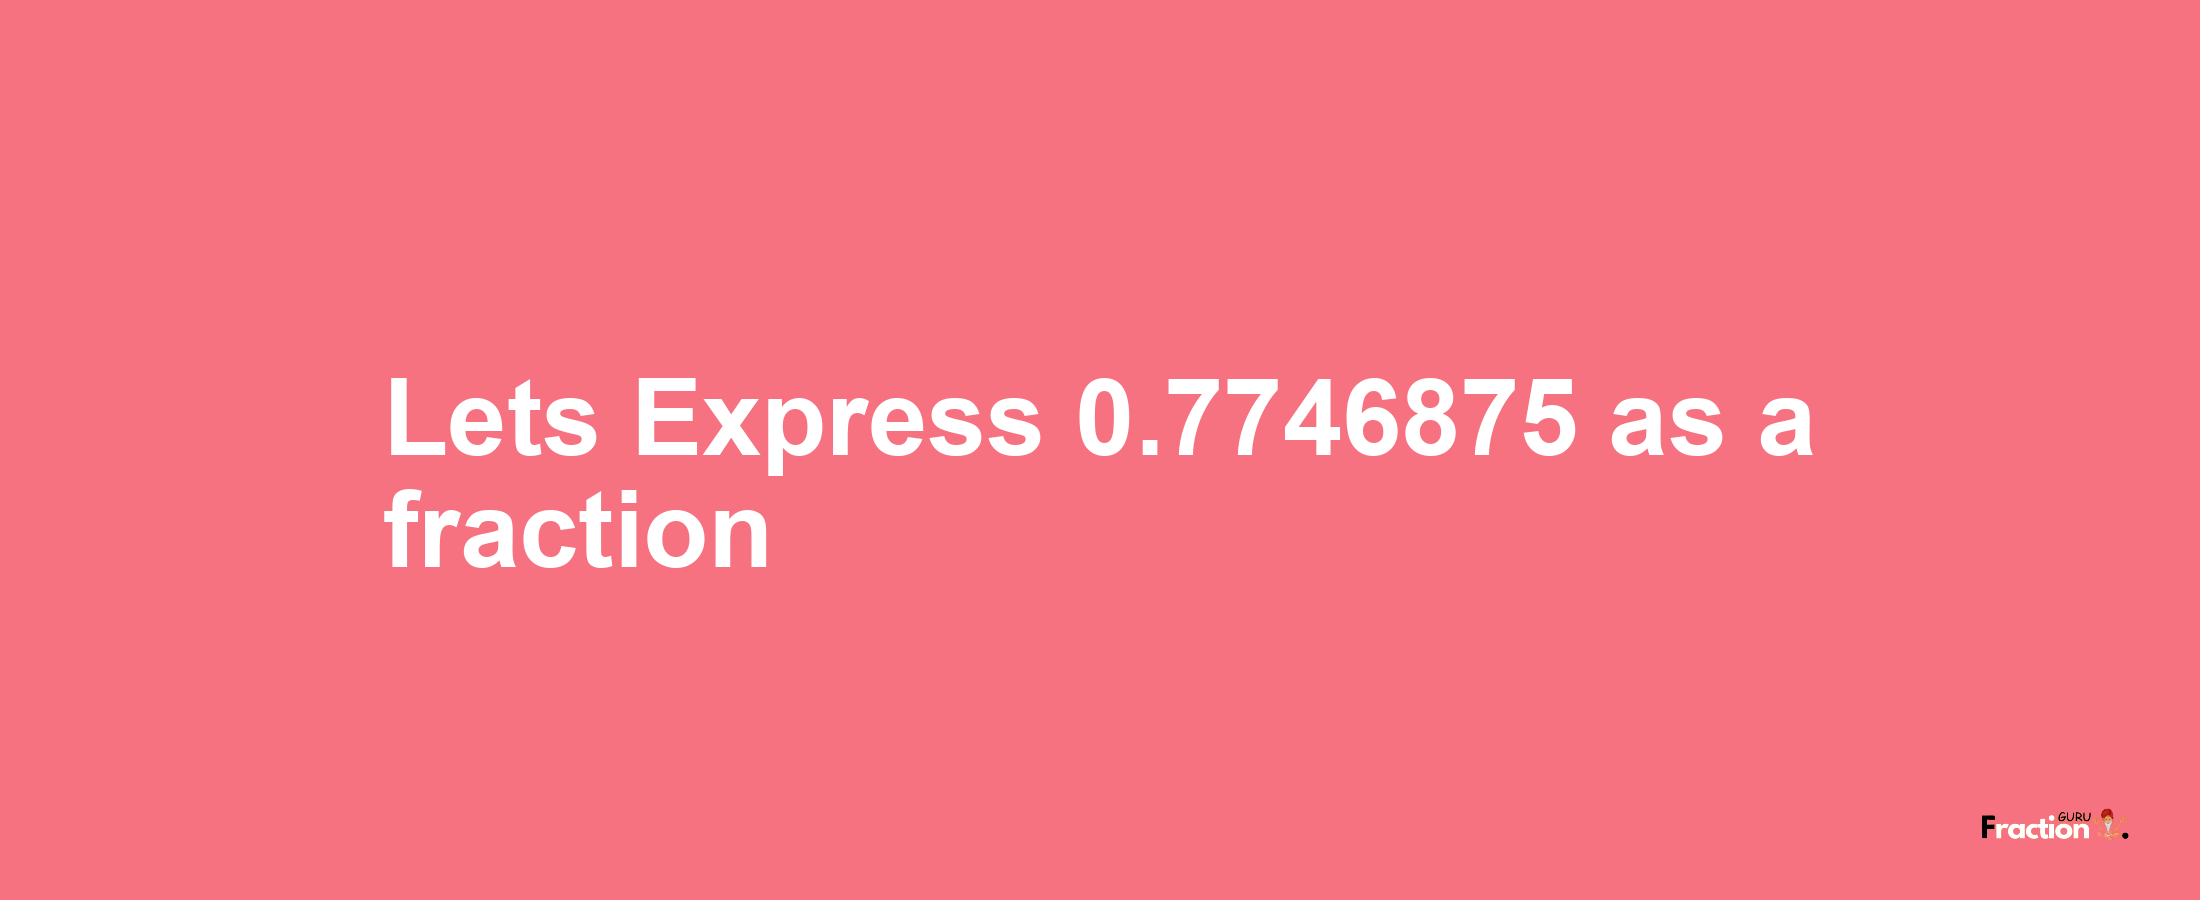 Lets Express 0.7746875 as afraction